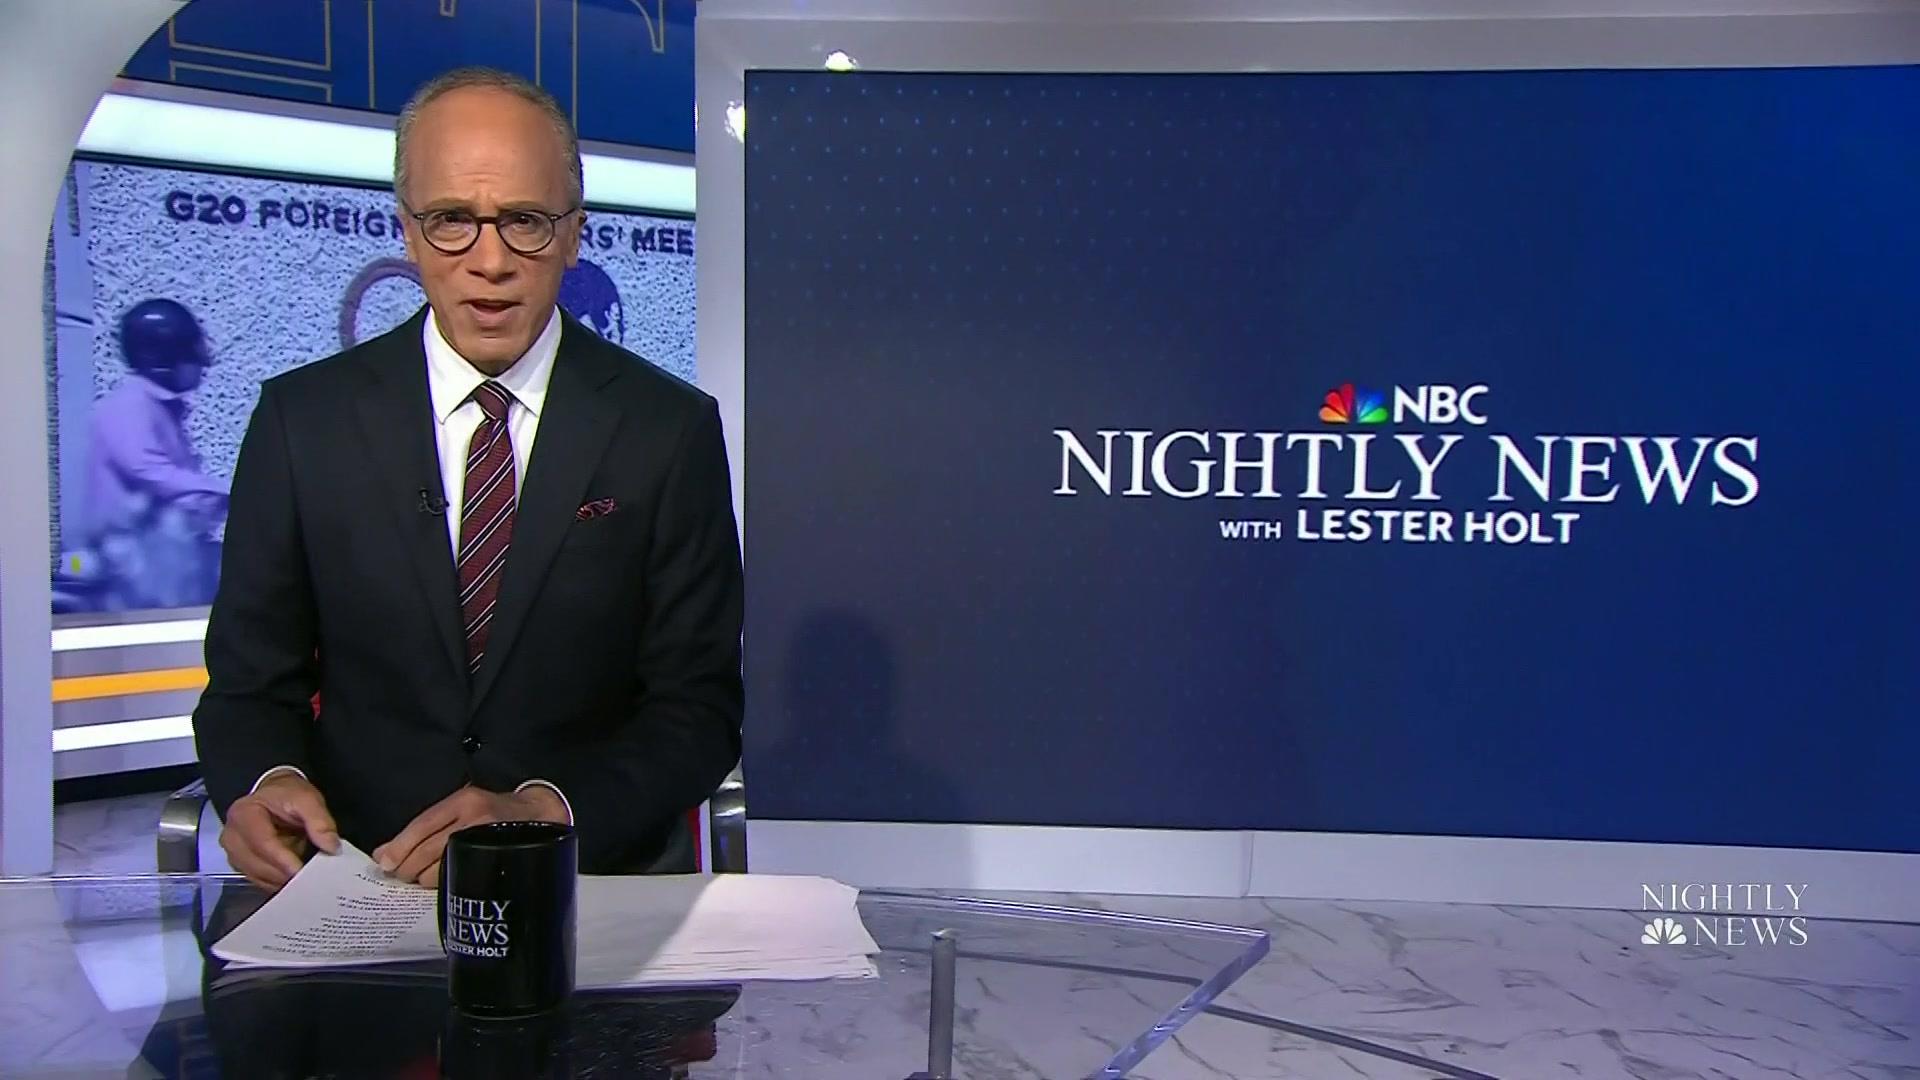 Watch NBC Nightly News with Lester Holt Episode NBC Nightly News 3/2